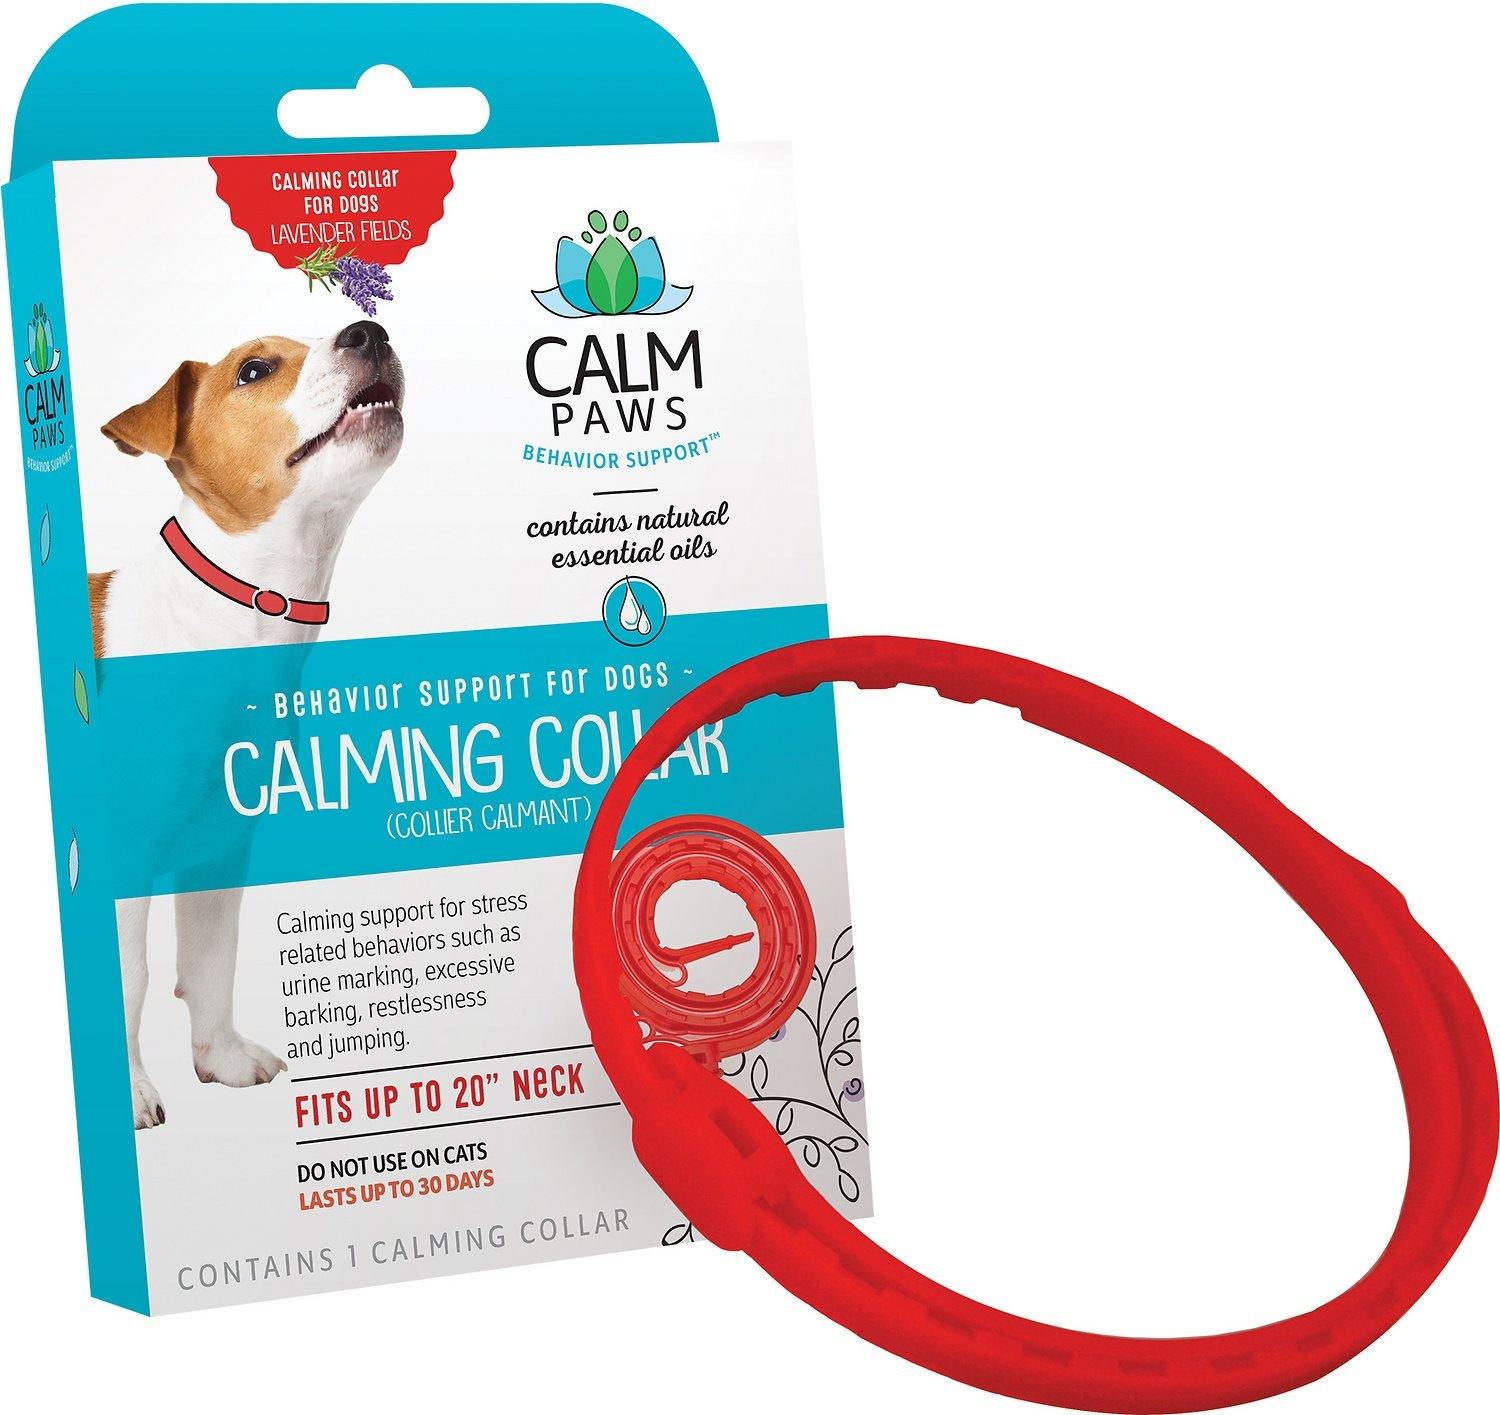 Canine's World Dog Calming Collars Calm Paws Calming Collar for Dogs Calm Paws